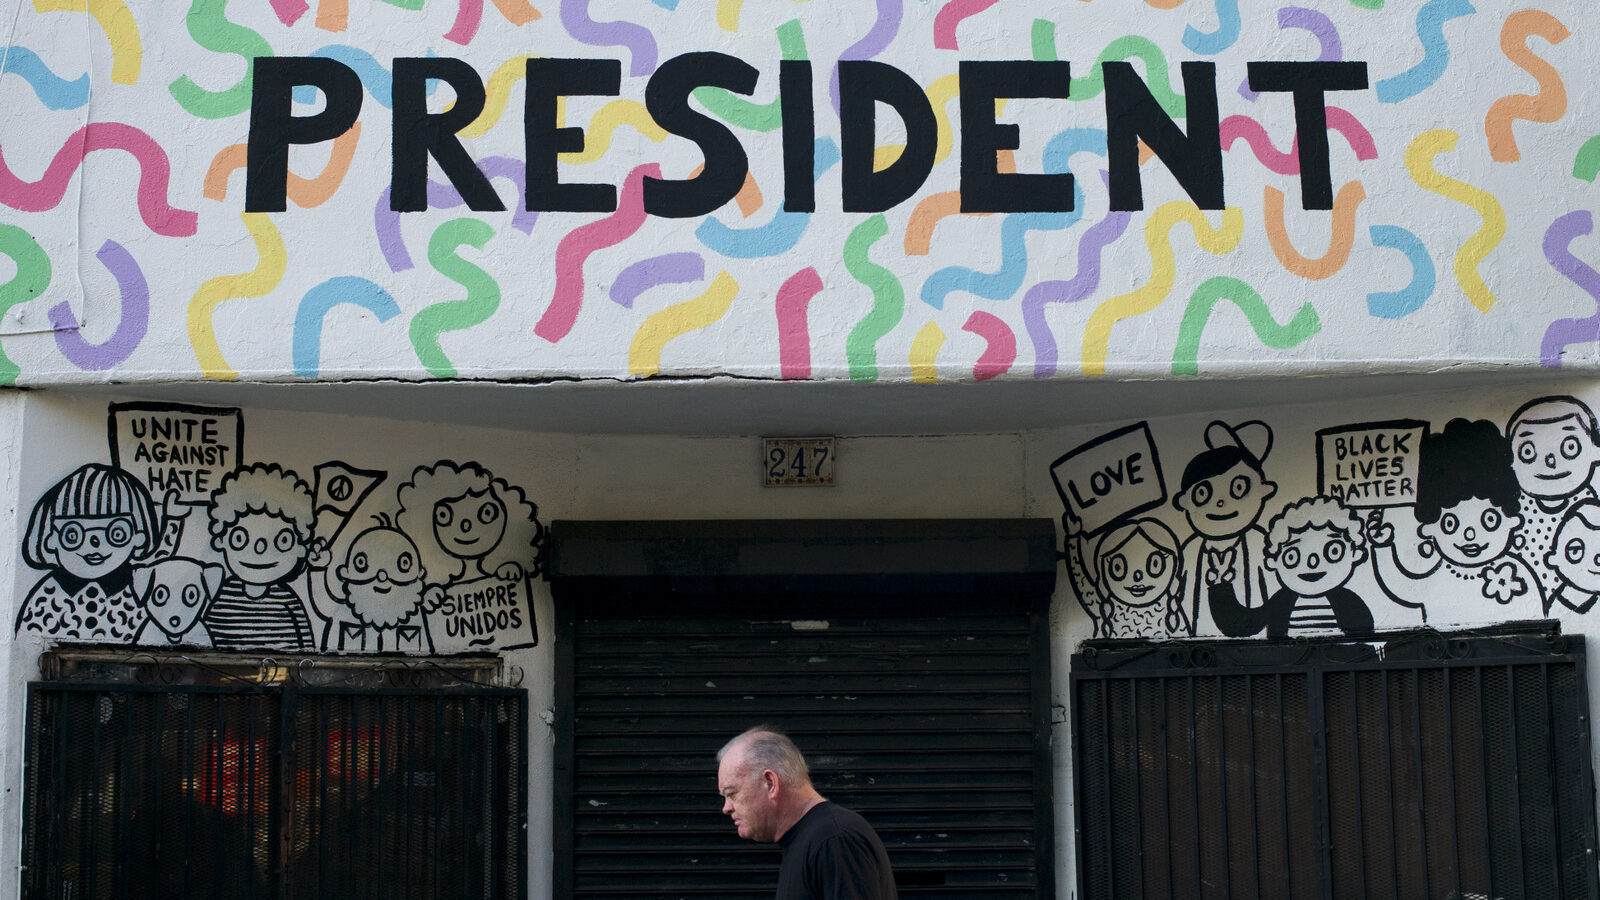 A man walks past a building with the phrase "Not Our President" written on the facade to protest against President-elect Donald Trump Thursday, Dec. 8, 2016, in Los Angeles. (AP Photo/Jae C. Hong)